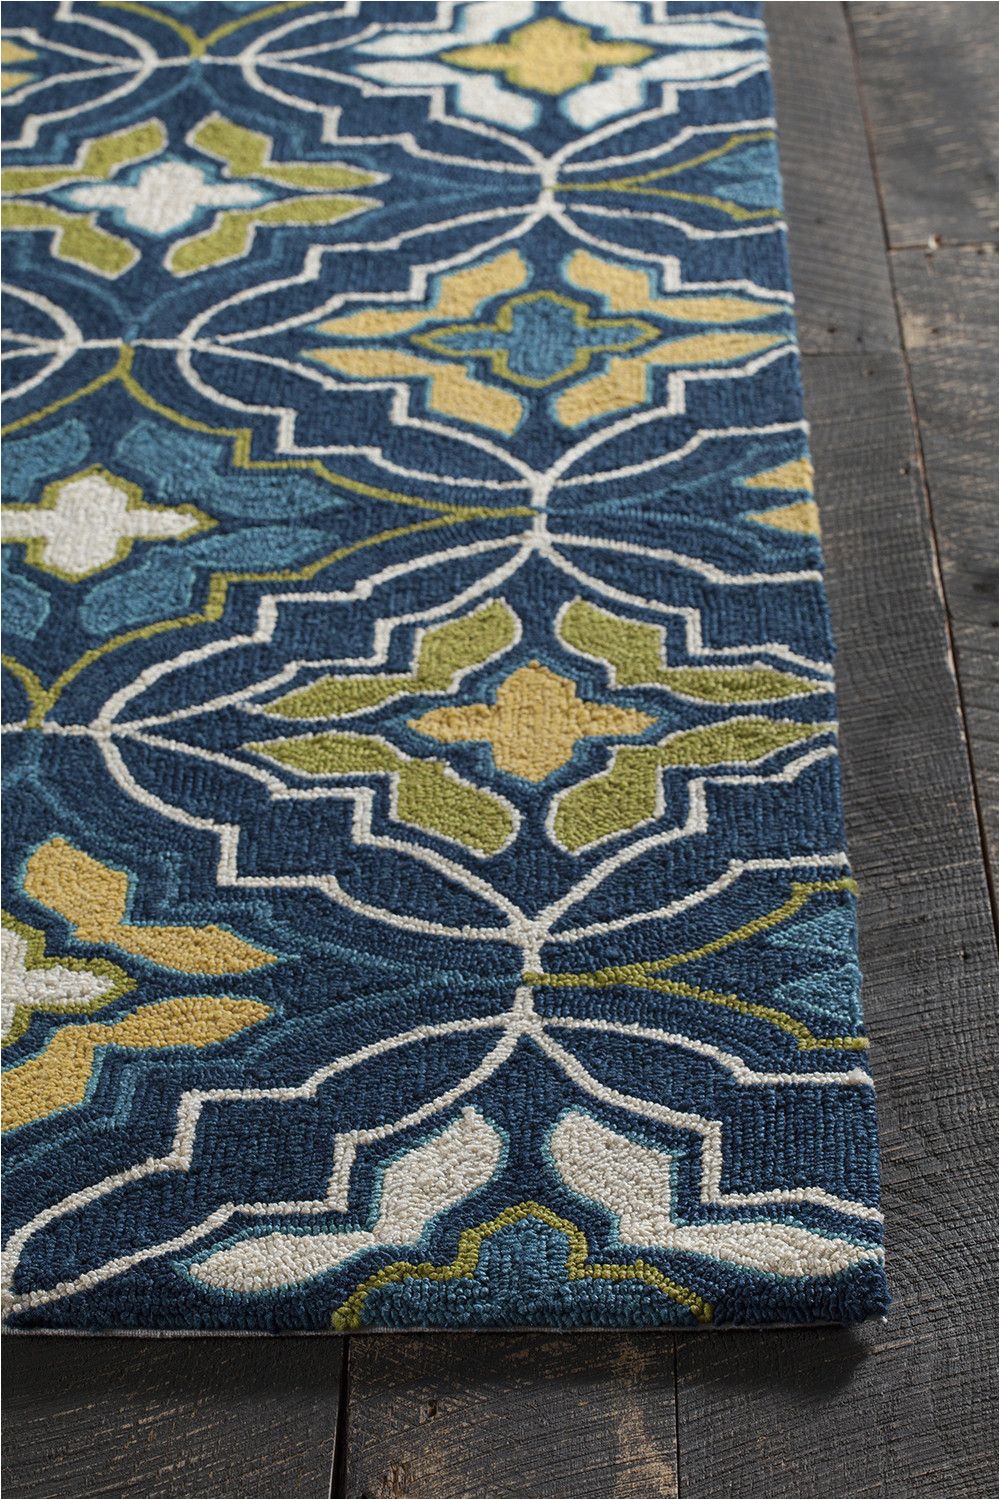 Area Rugs Green and Cream Terra Collection Hand Tufted area Rug In Blue Green Yellow